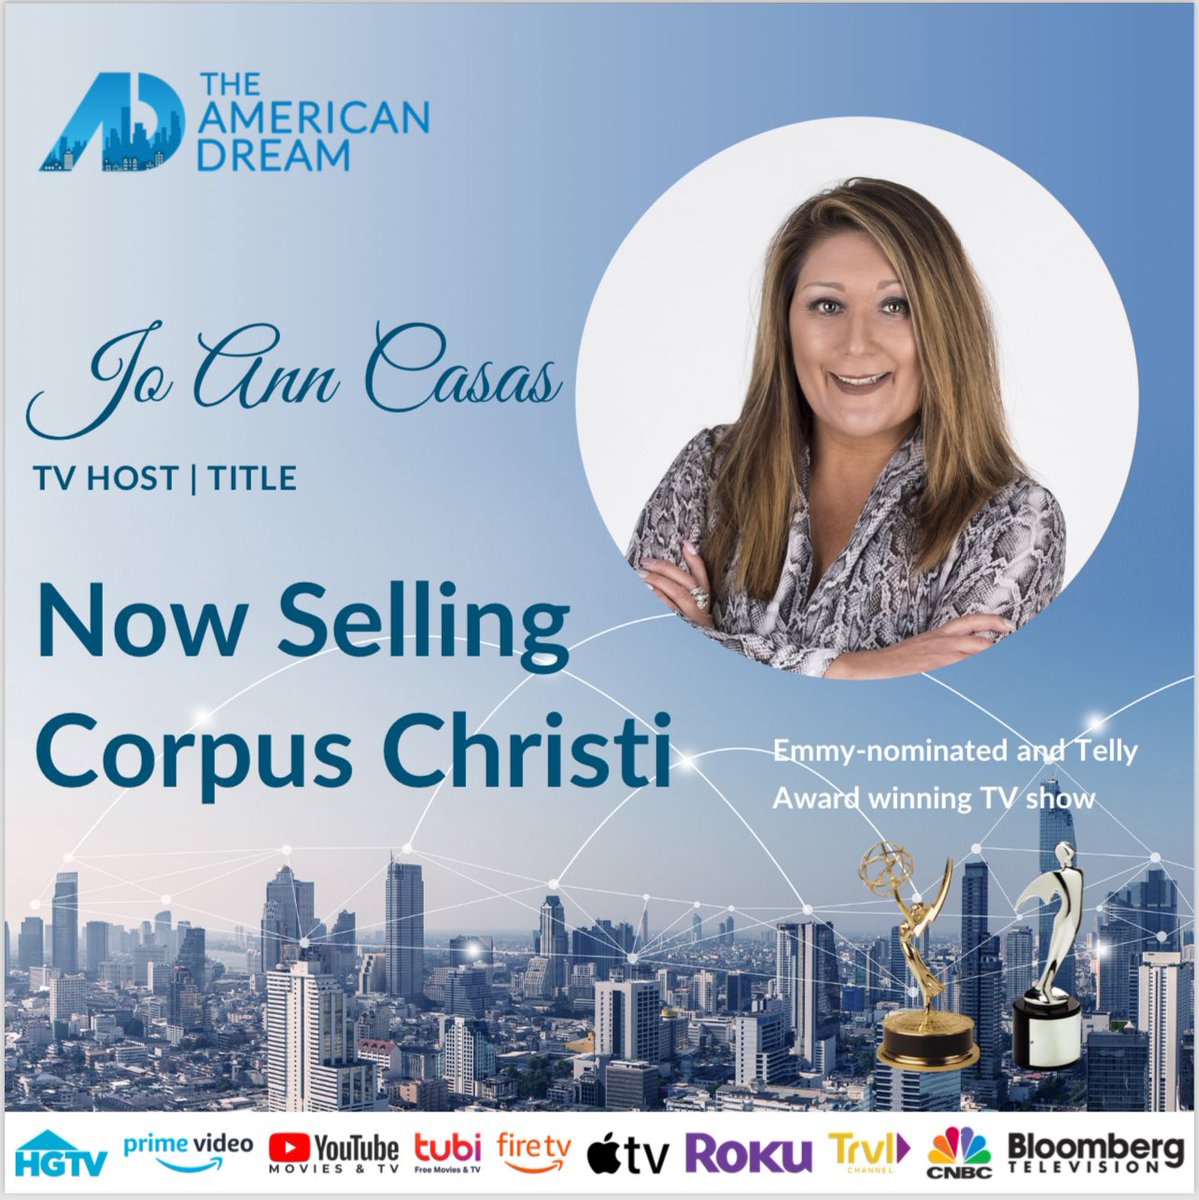 🌟 Exciting News! 🌟

Thrilled to announce I'm now hosting the Emmy-nominated American Dream TV show! 🏆 Excited to feature the Coastal Bend and its treasures. Casting call: Know any movers and shakers or selling your home in 2024? Let's chat! 🏡💼 #AmericanDreamTV #CoastalBend